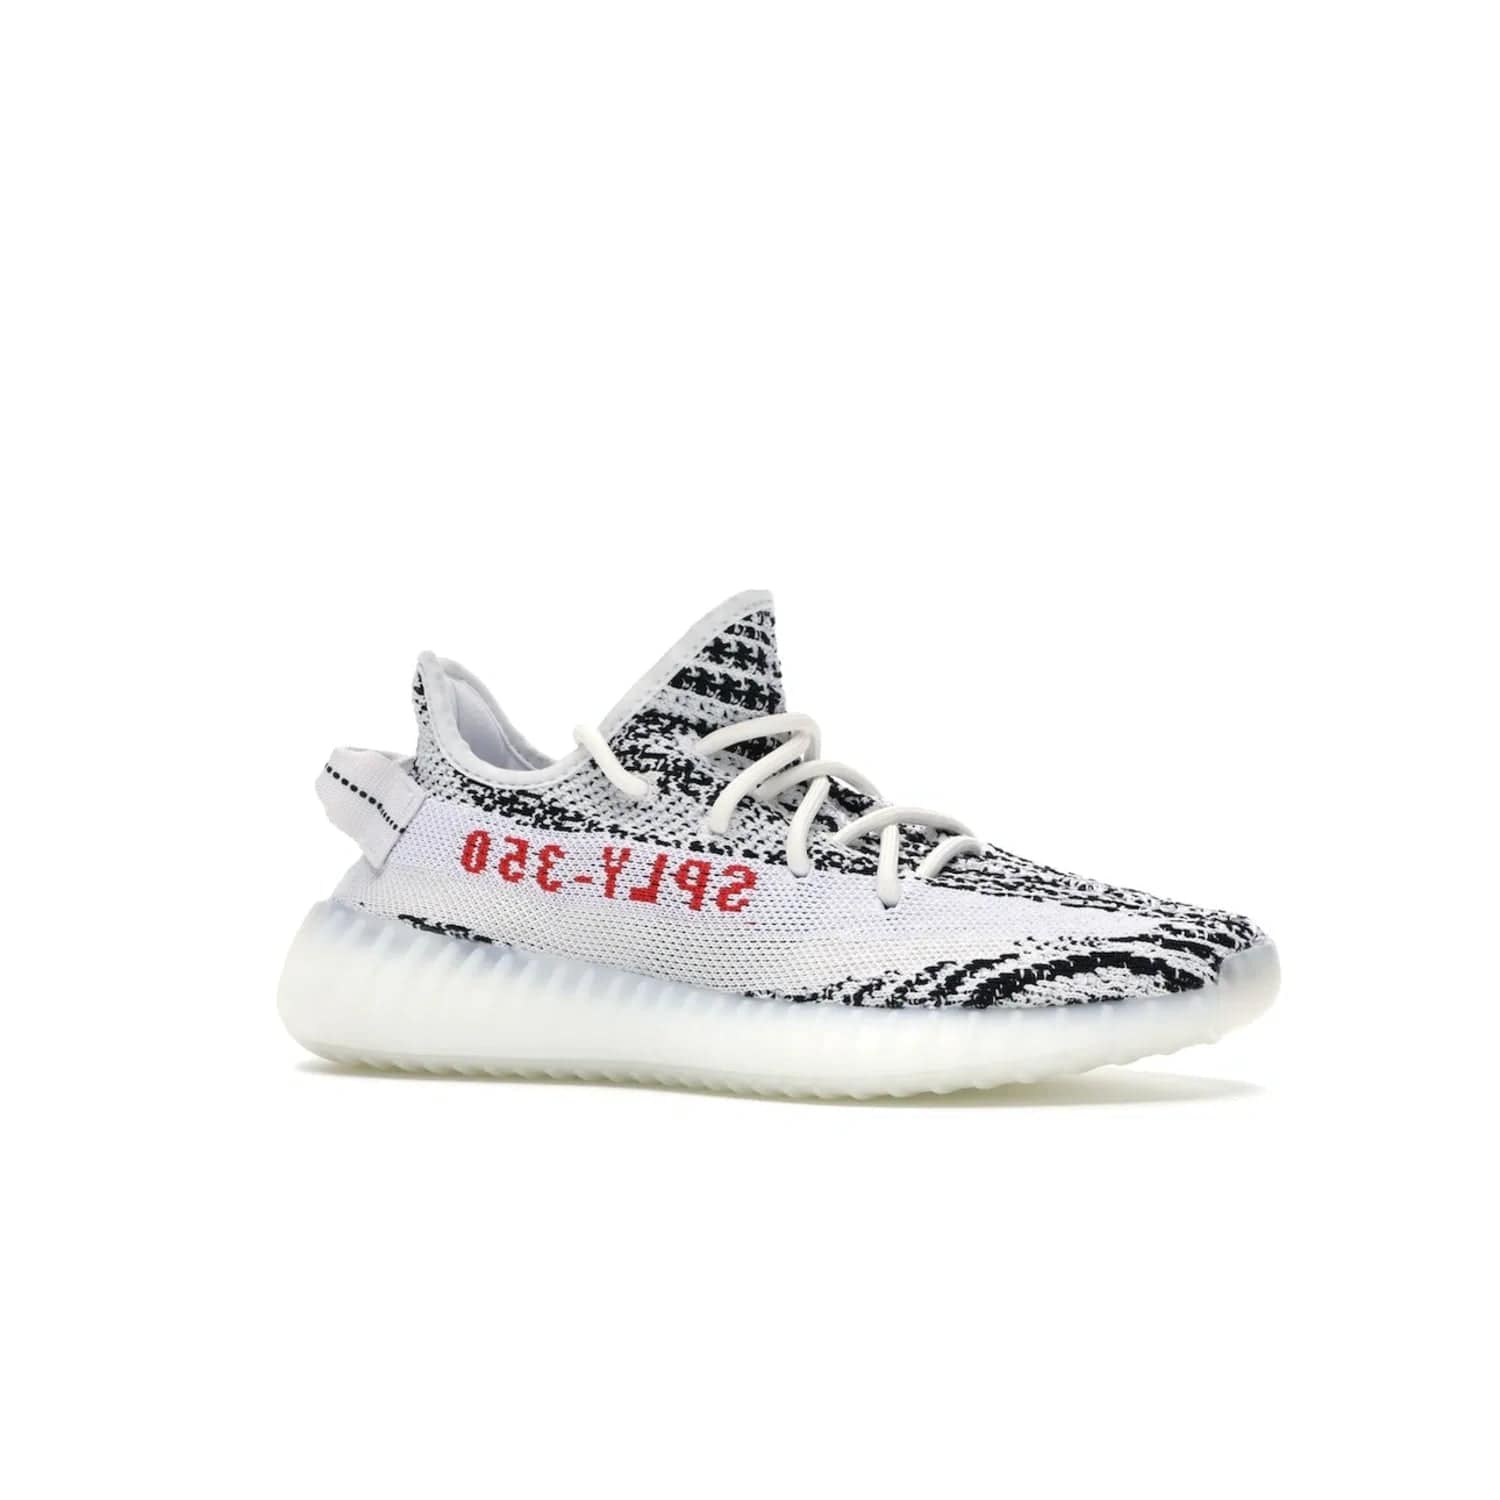 adidas Yeezy Boost 350 V2 Zebra - Image 3 - Only at www.BallersClubKickz.com - #
Score the iconic adidas Yeezy Boost 350 V2 Zebra for a fashionable addition to your street-style. Featuring a Primeknit upper and Boost sole, you'll look great and feel comfortable with every step.